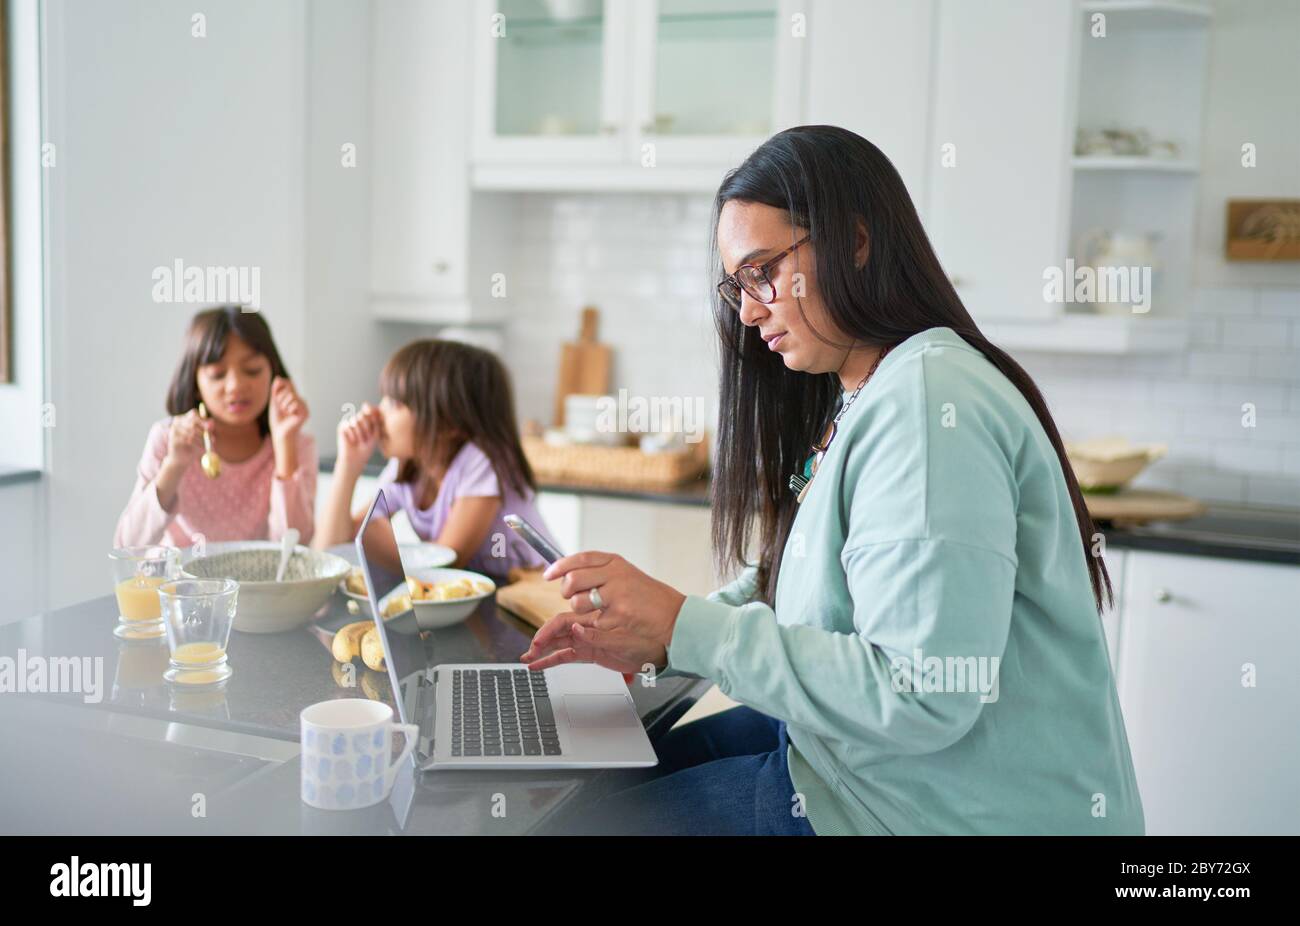 Mother working at laptop in kitchen while daughters eat breakfast Stock Photo